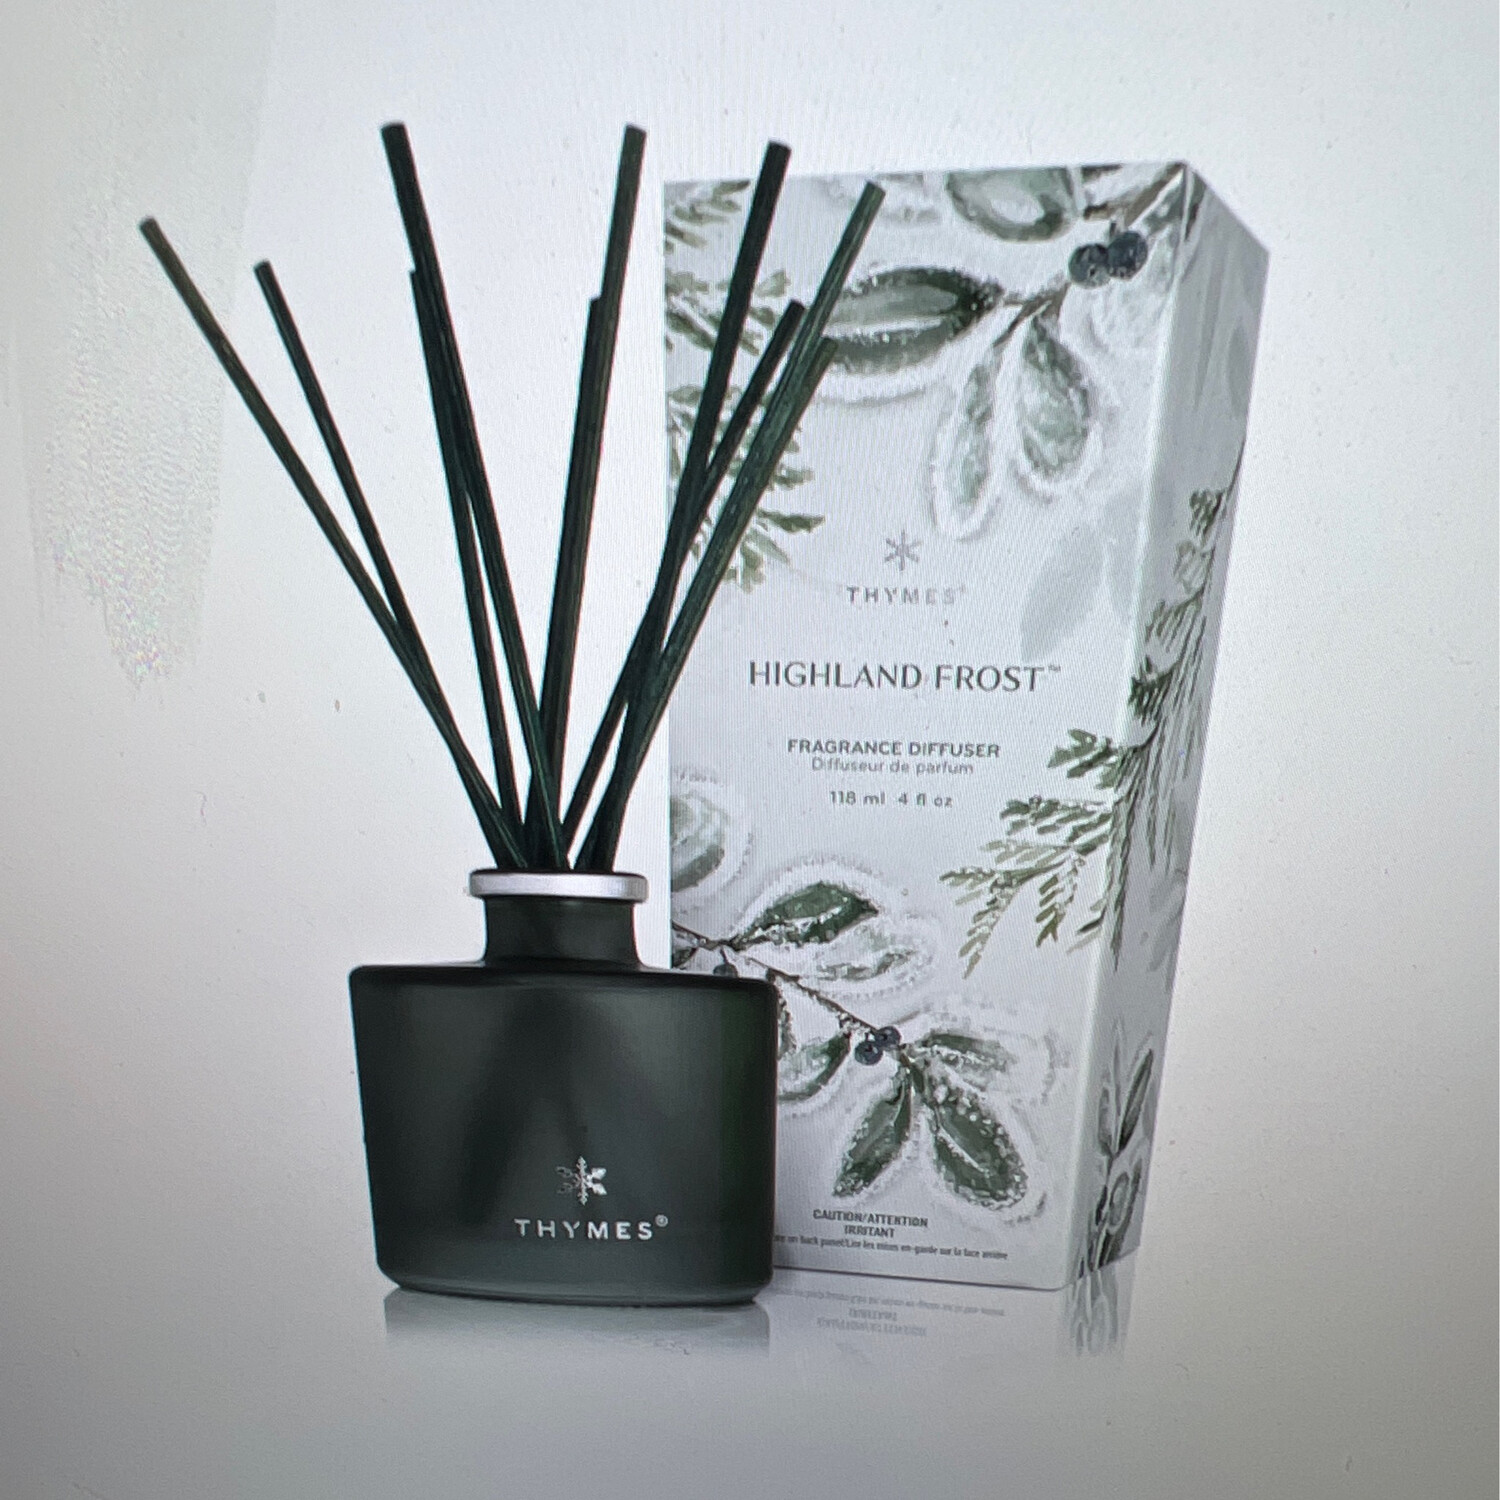 THYMES Highland Frost Petite Diffuser